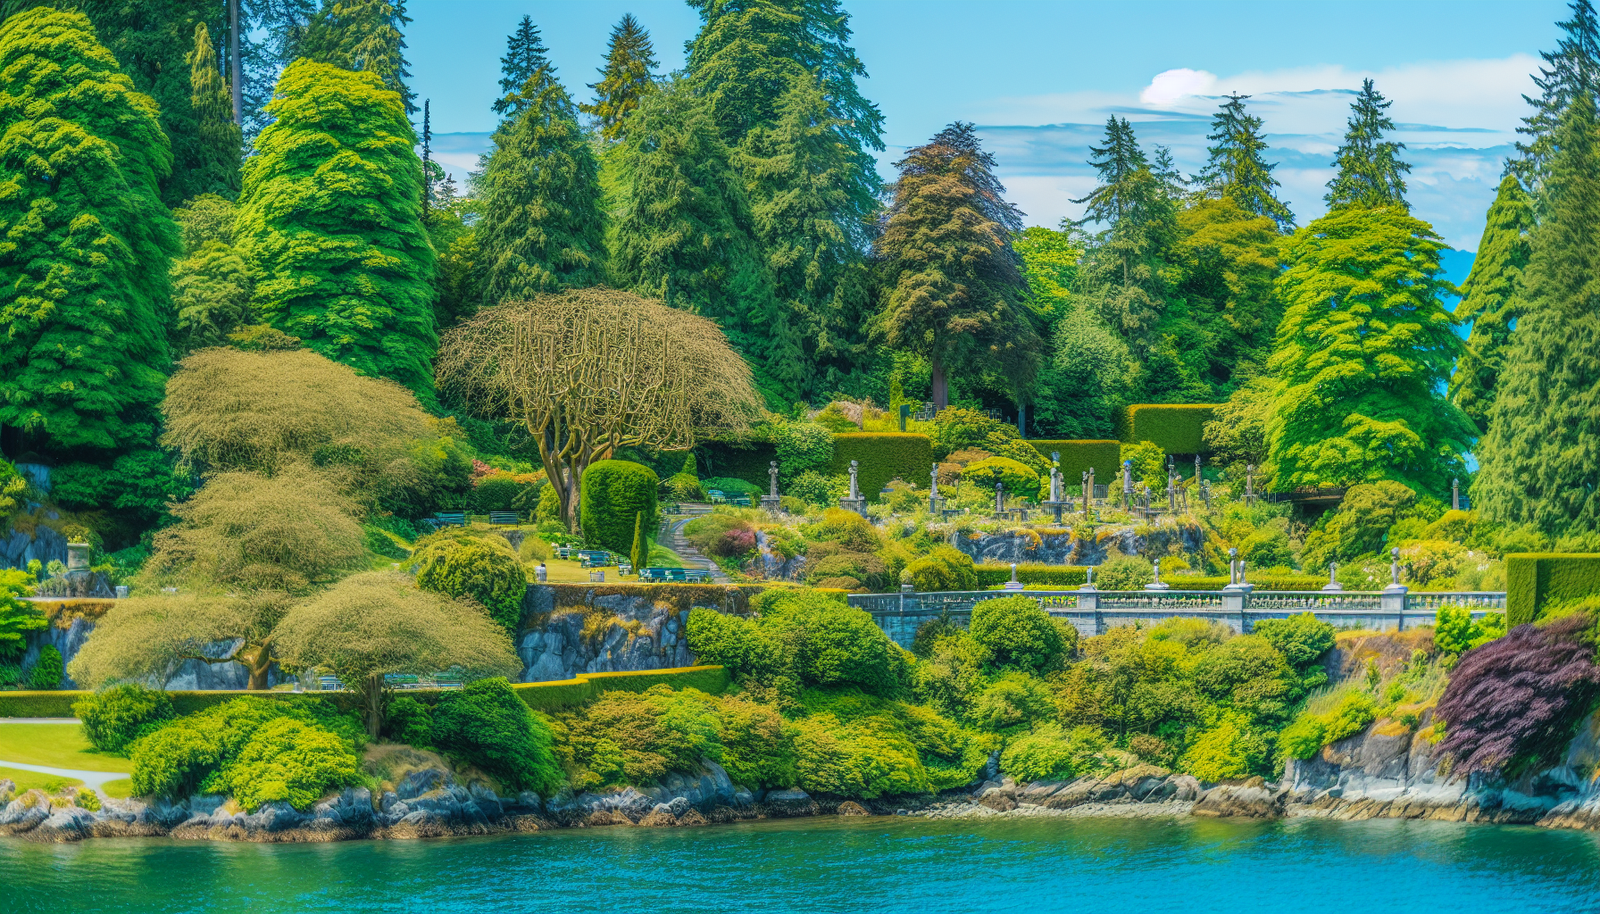 Scenic view of Stanley Park with lush greenery and the ocean